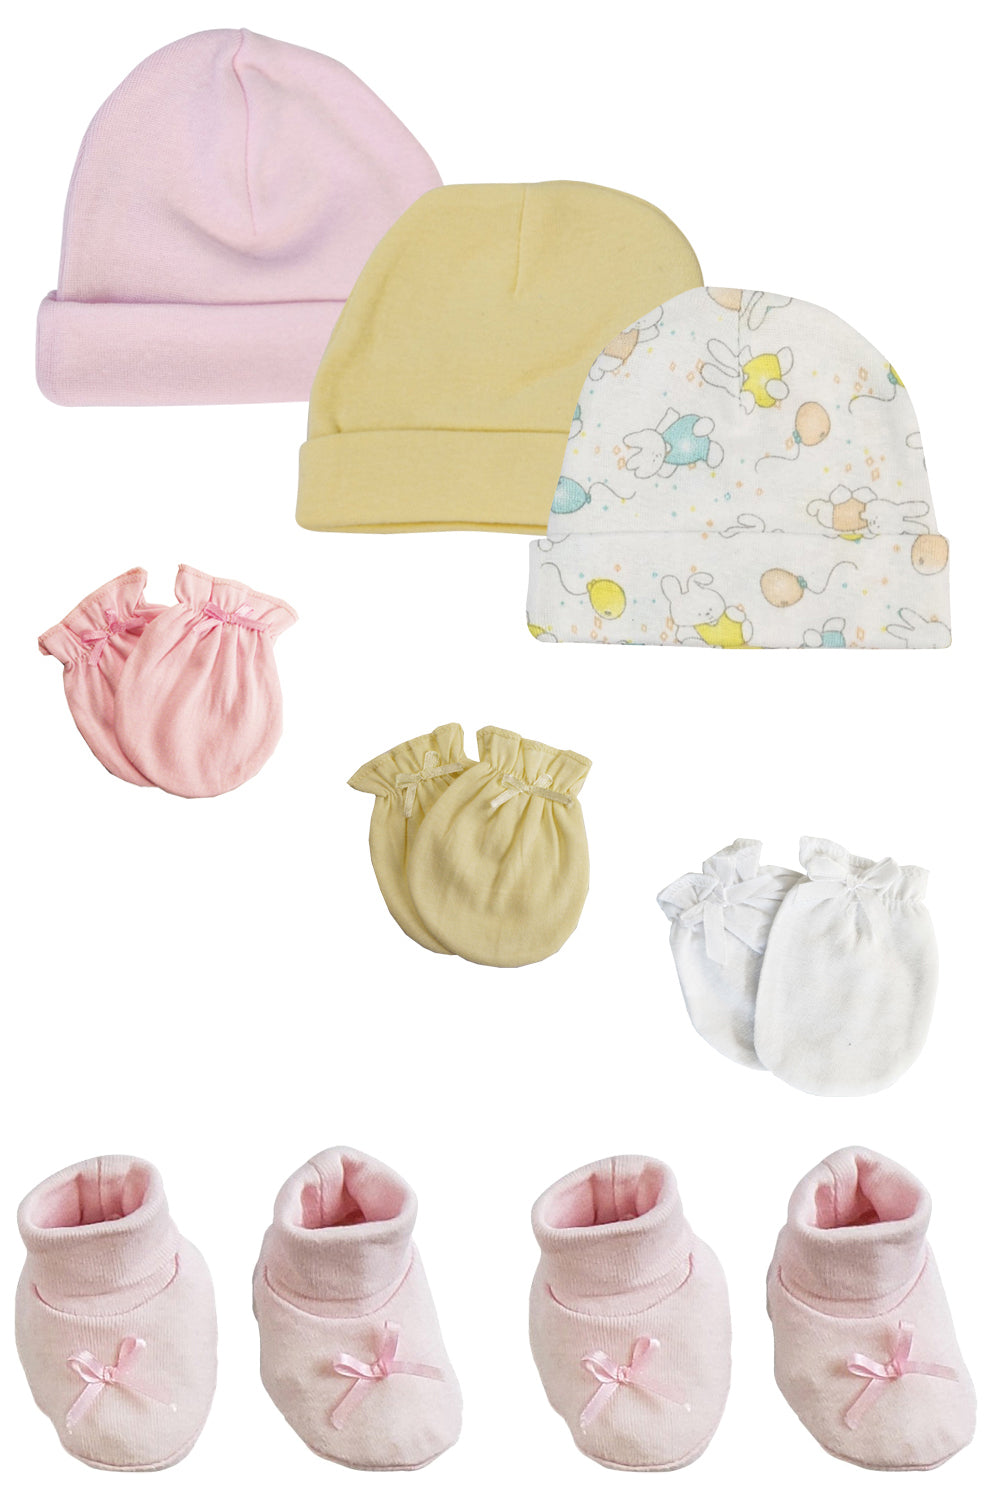 Preemie Baby Girl Caps with Infant Mittens and Booties - 8 Pack NC_0209